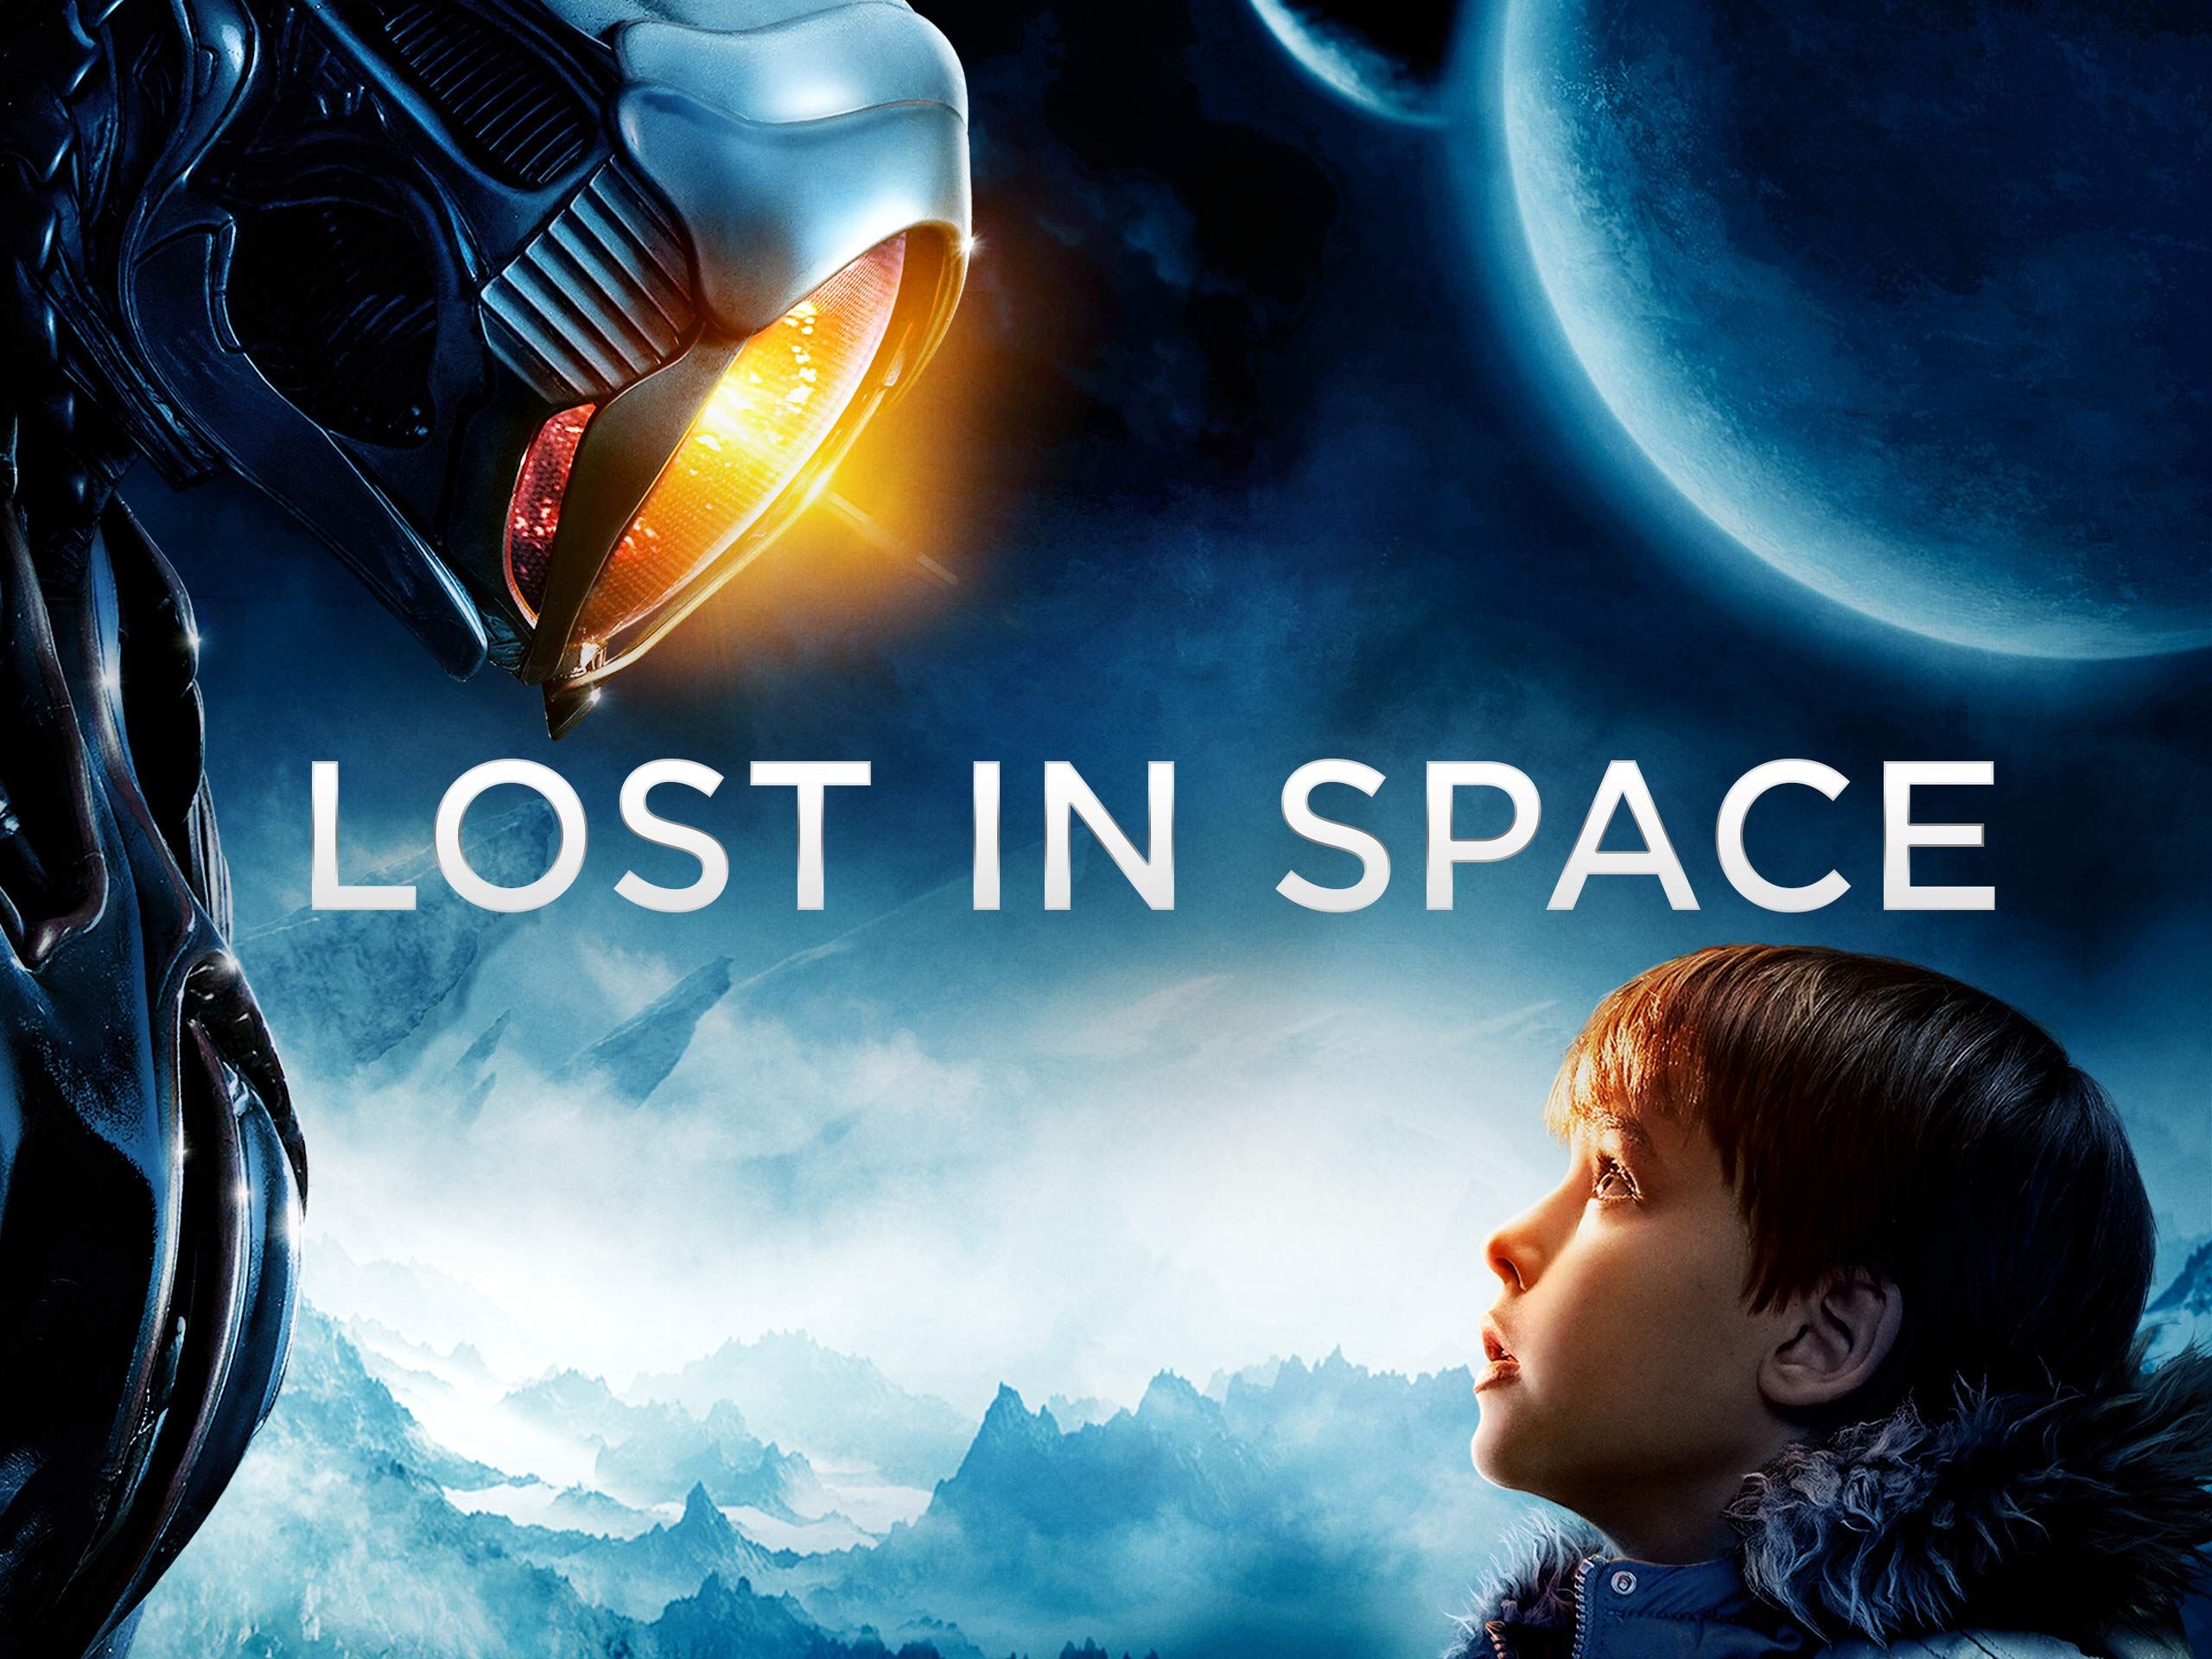 Lost In Space Season 1 and 2 Recap - What To Expect In Finale Season 3